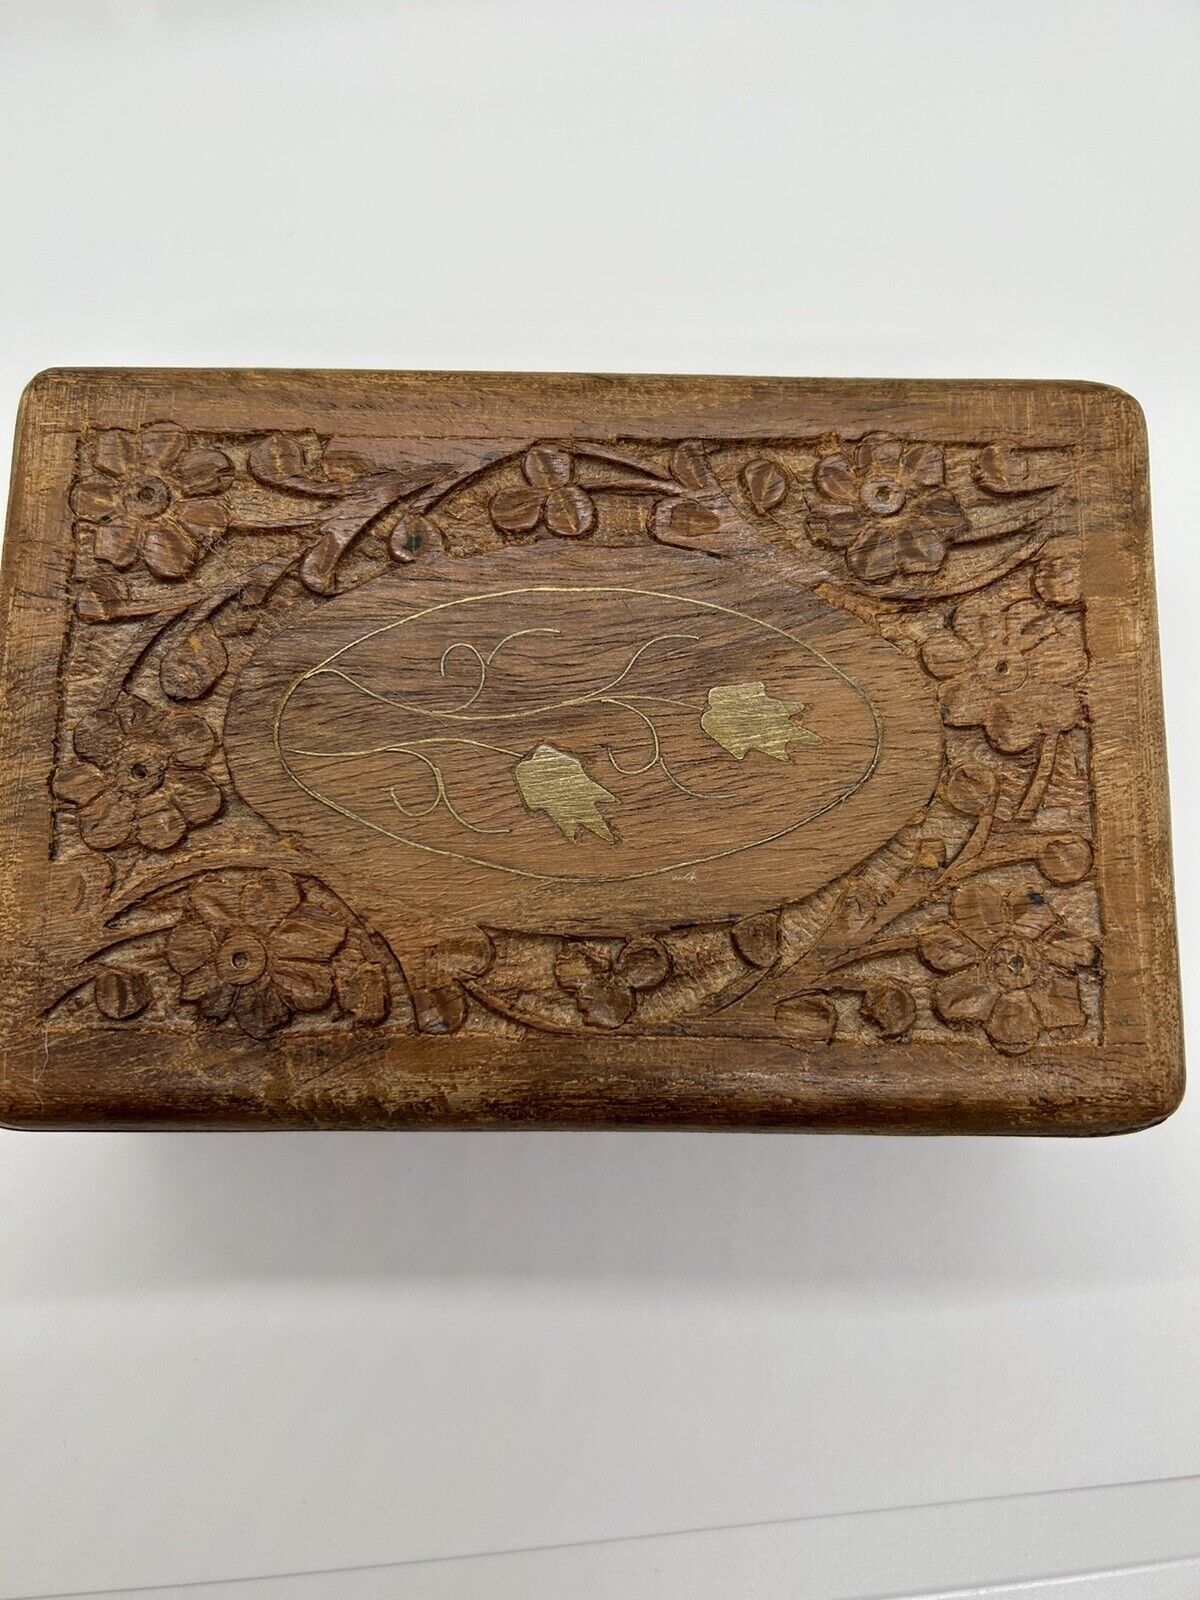 Vintage Hand Carved Wooden Hinged Box 6” x 4” x 2.5” Lined with Red Material